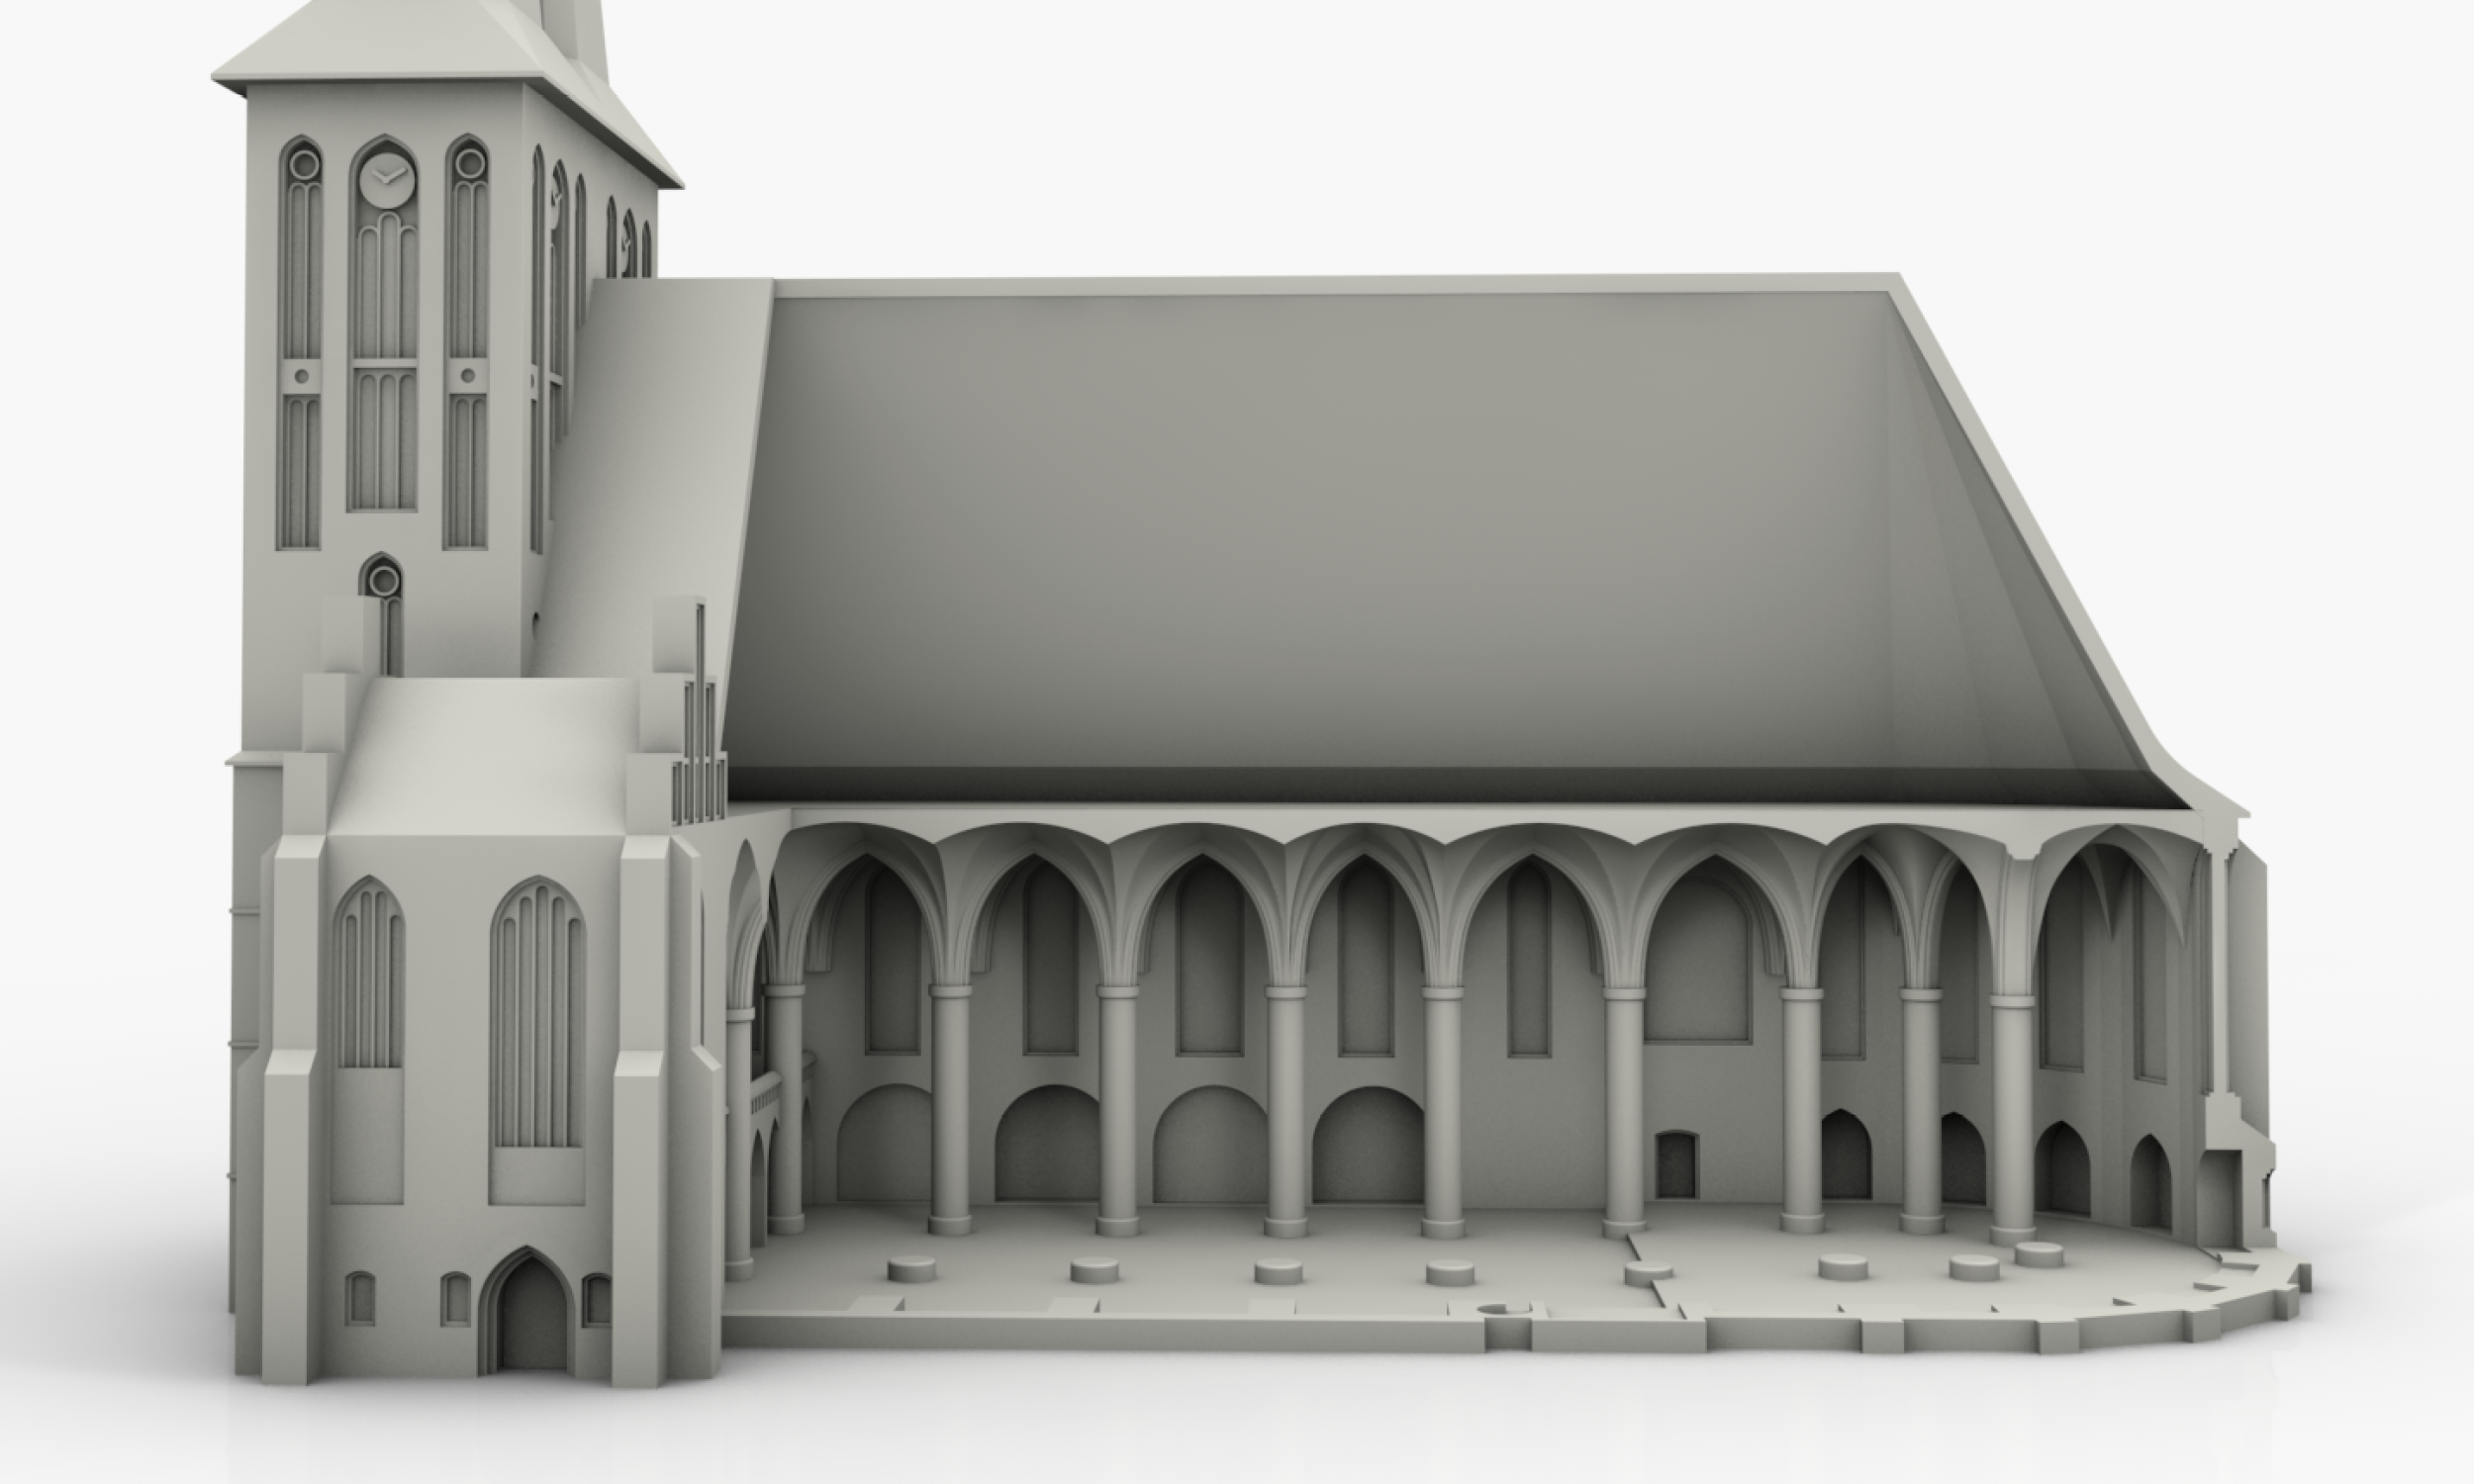 This graphic shows the complete model with the cut open interior of the Nikolaikirche.